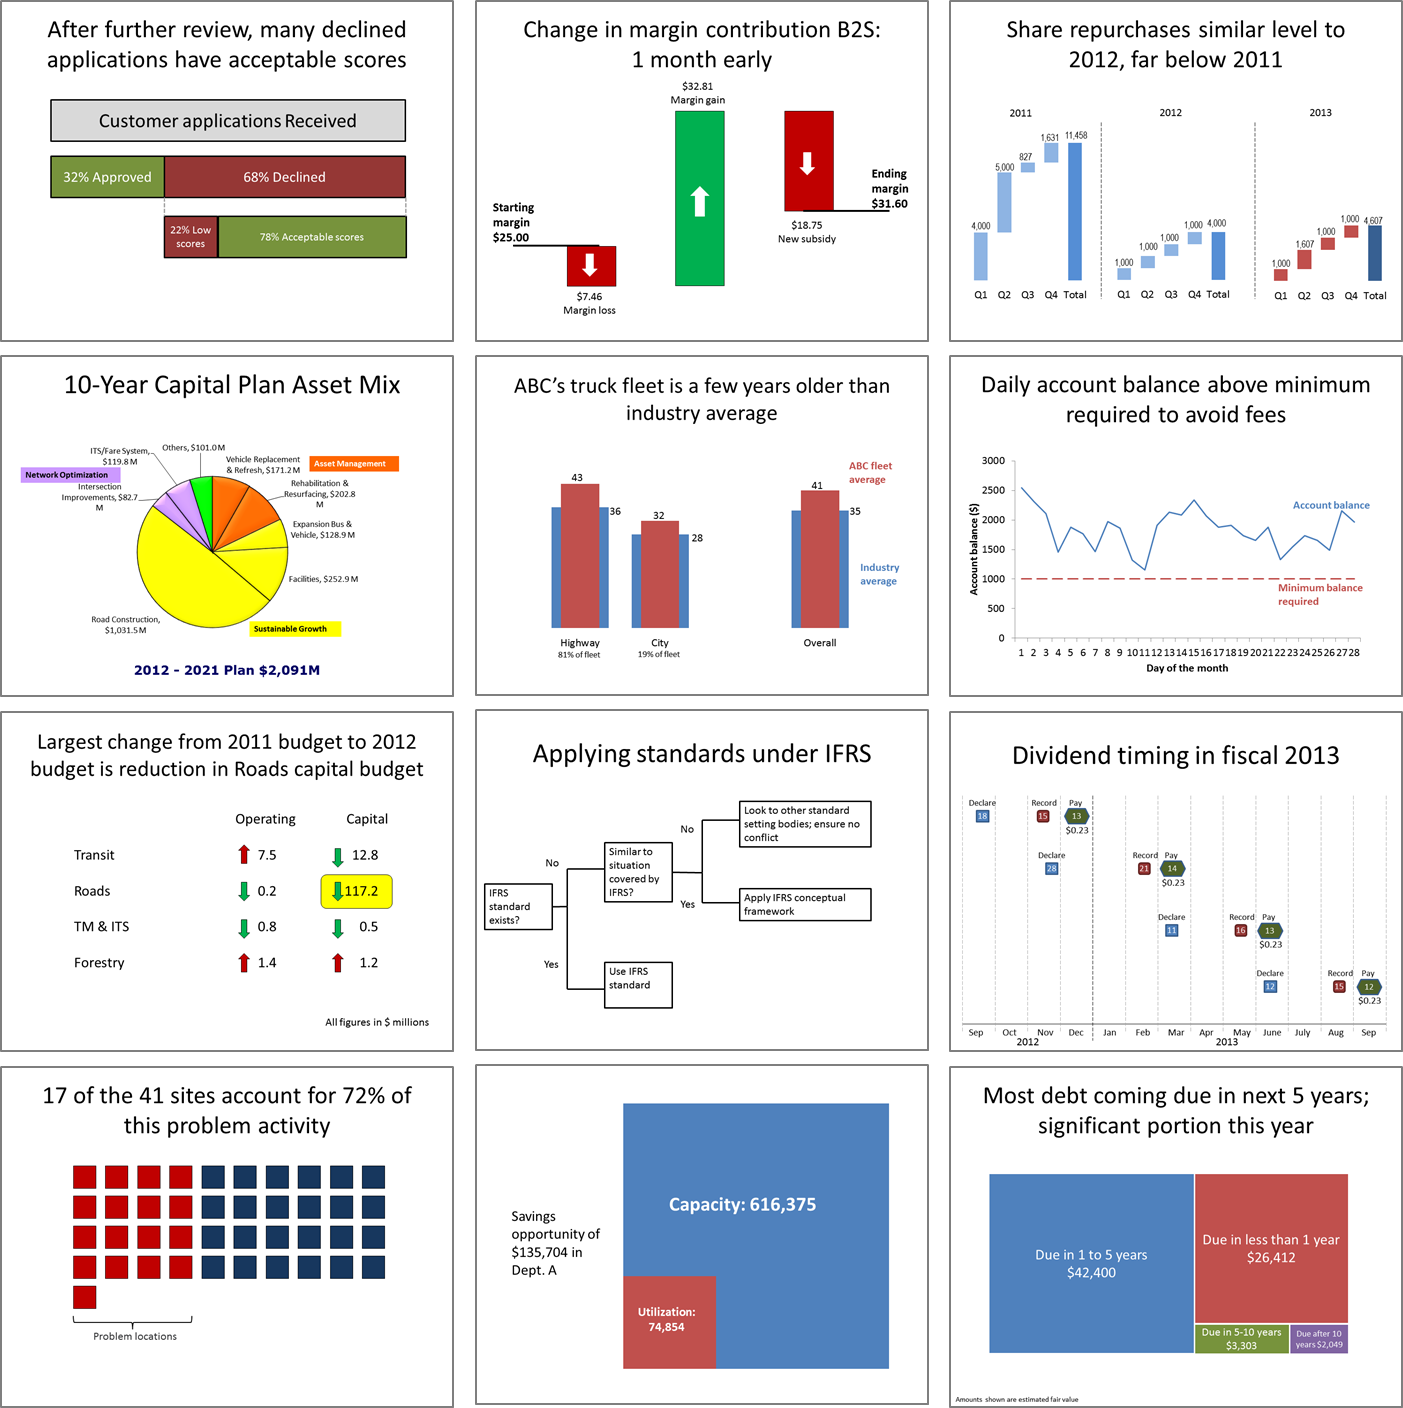 7 Data Presentation Tips: Think, Focus, Simplify, Calibrate, Visualize++